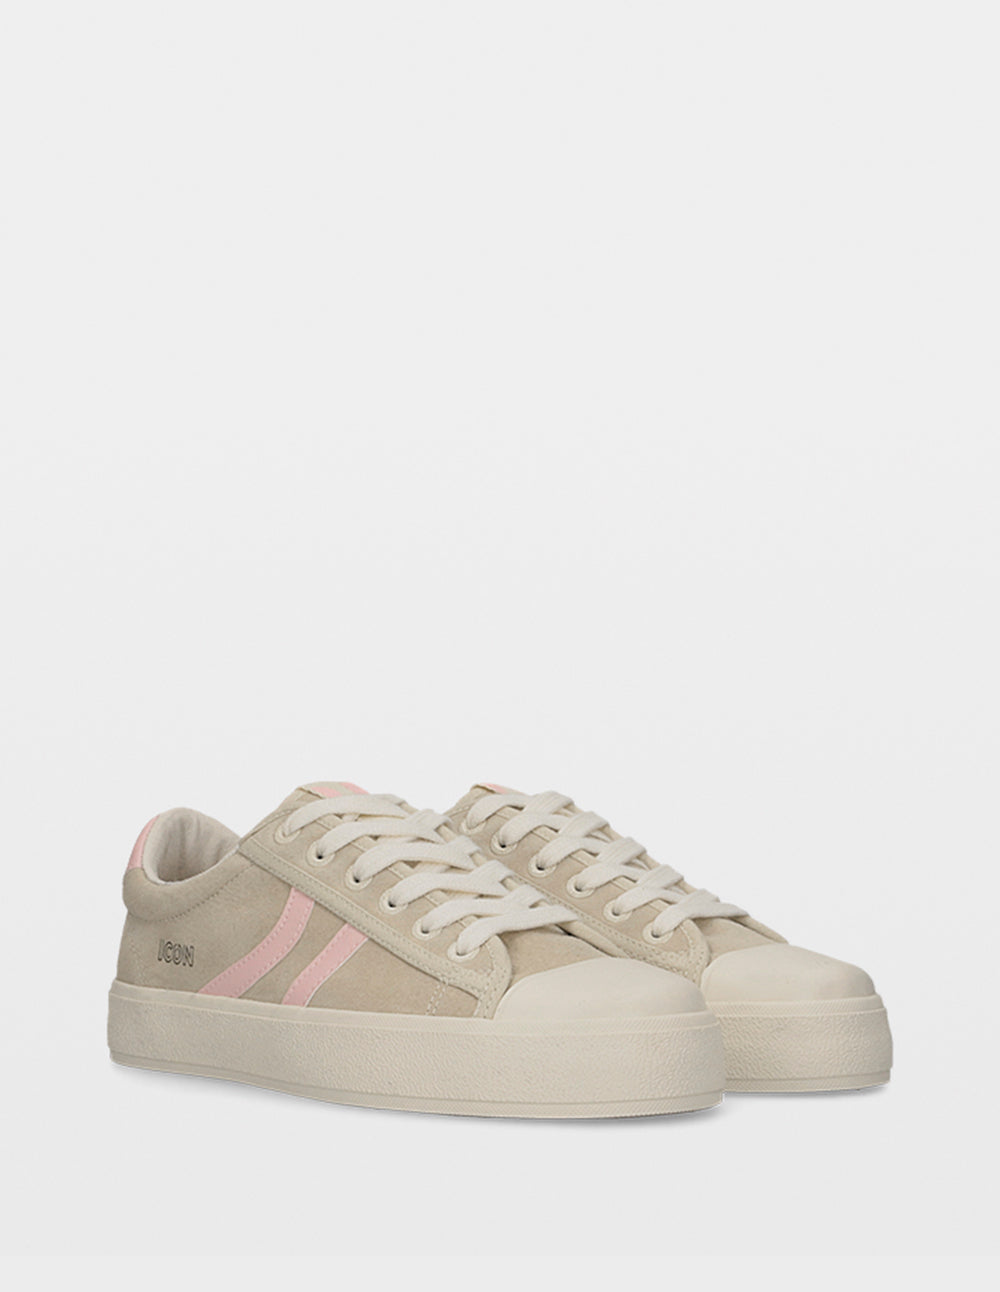 ICON-ONE BEIGE/PINK LEATHER MUJER